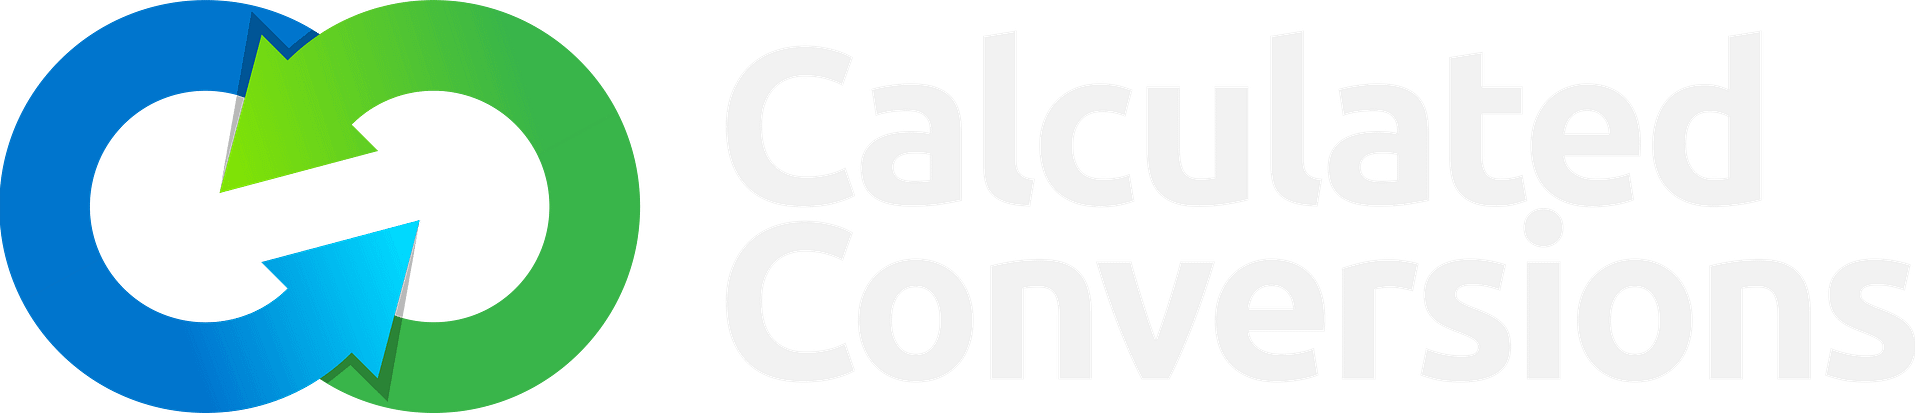 calculated conversions logo